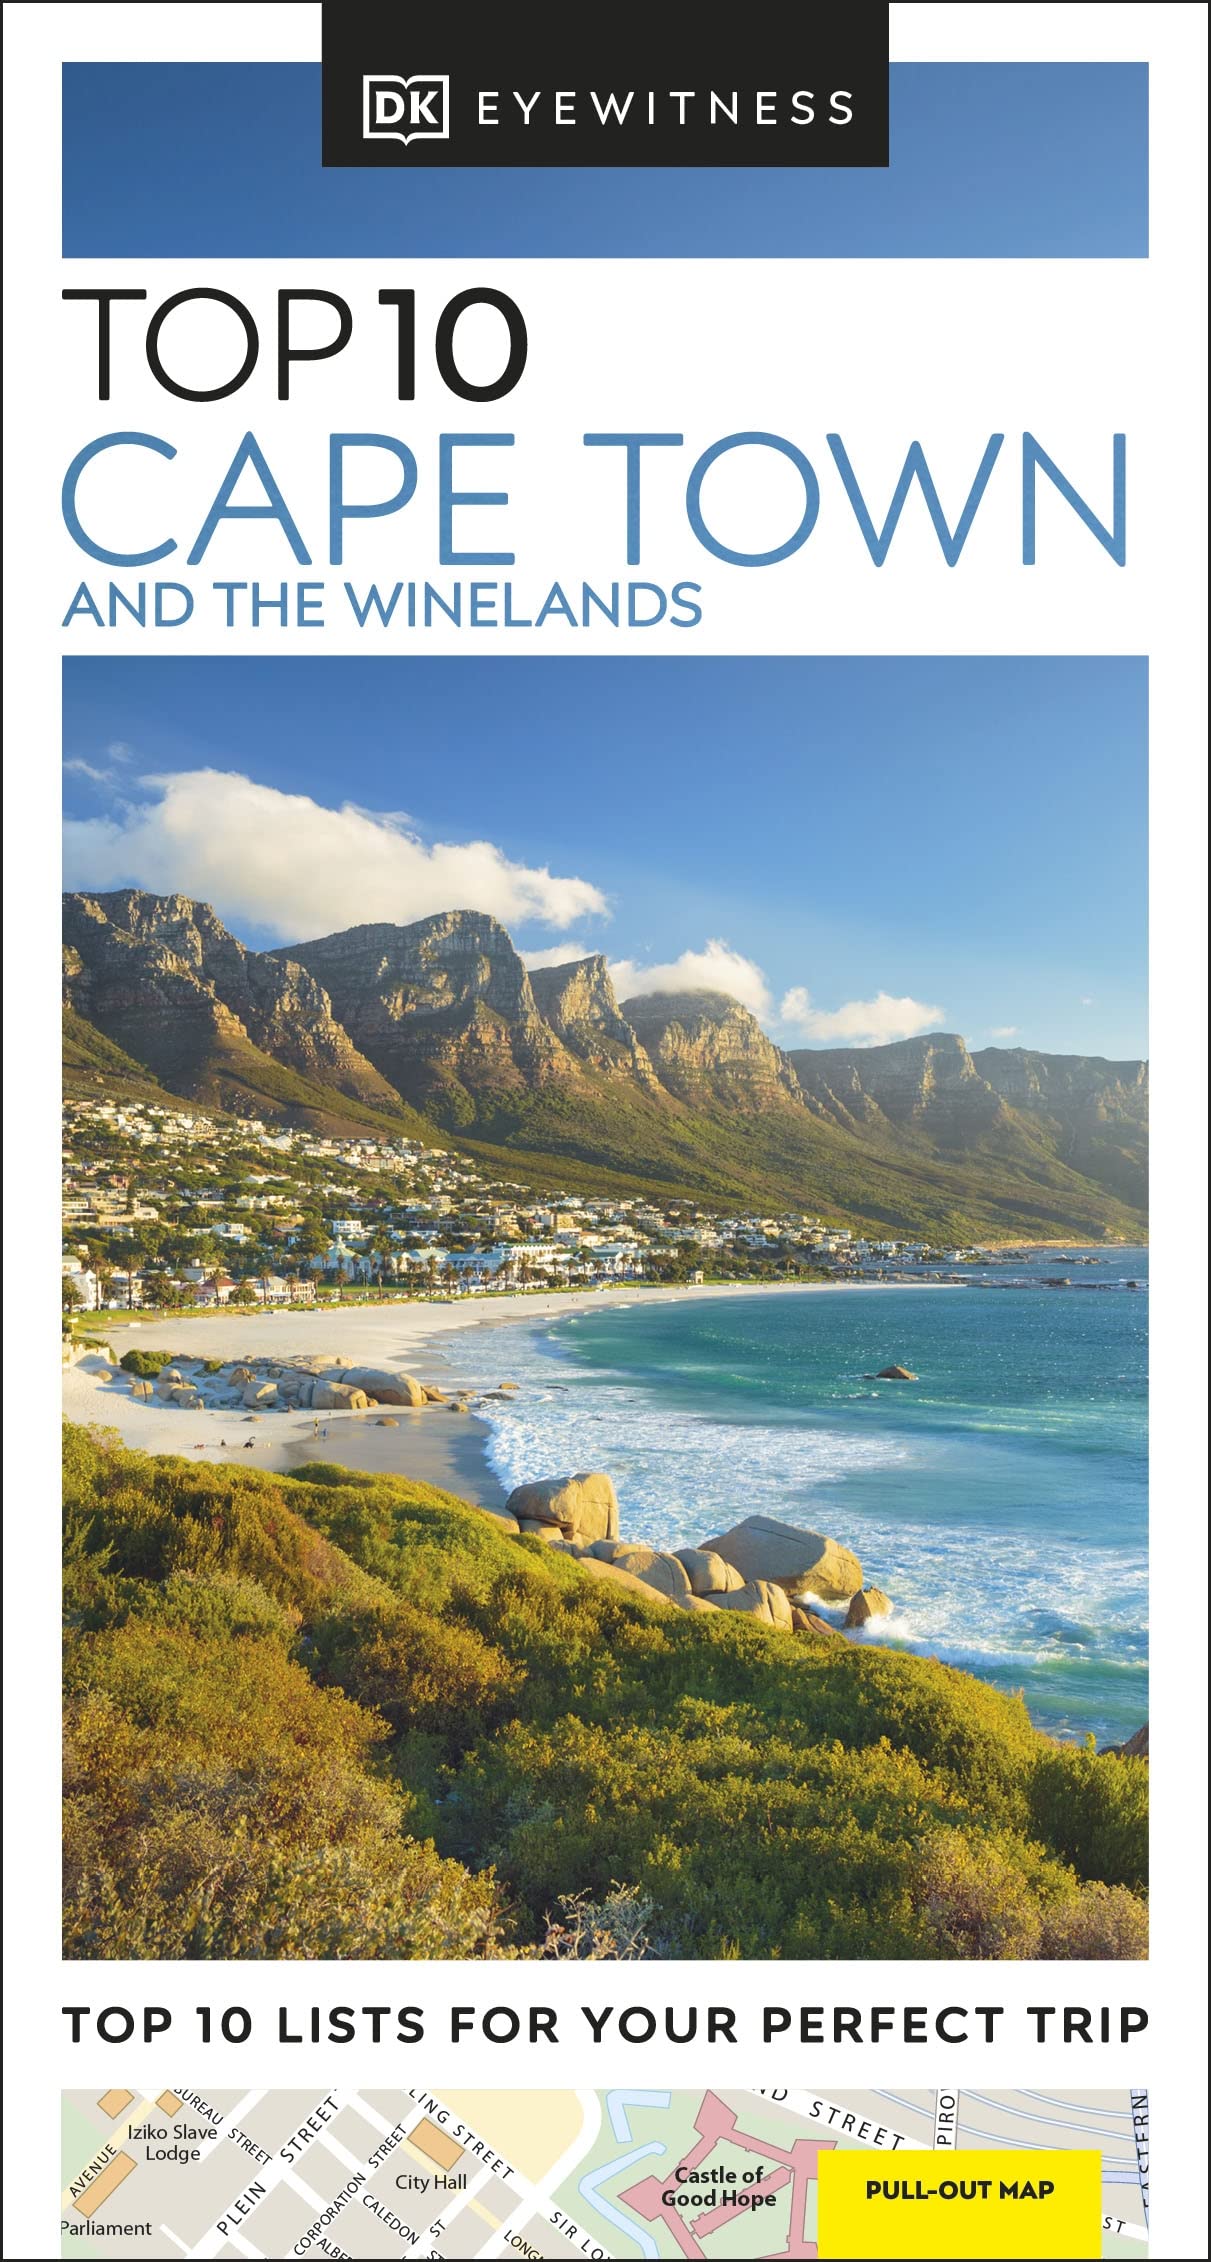 Eyewitness Top 10 Cape Town and the Winelands